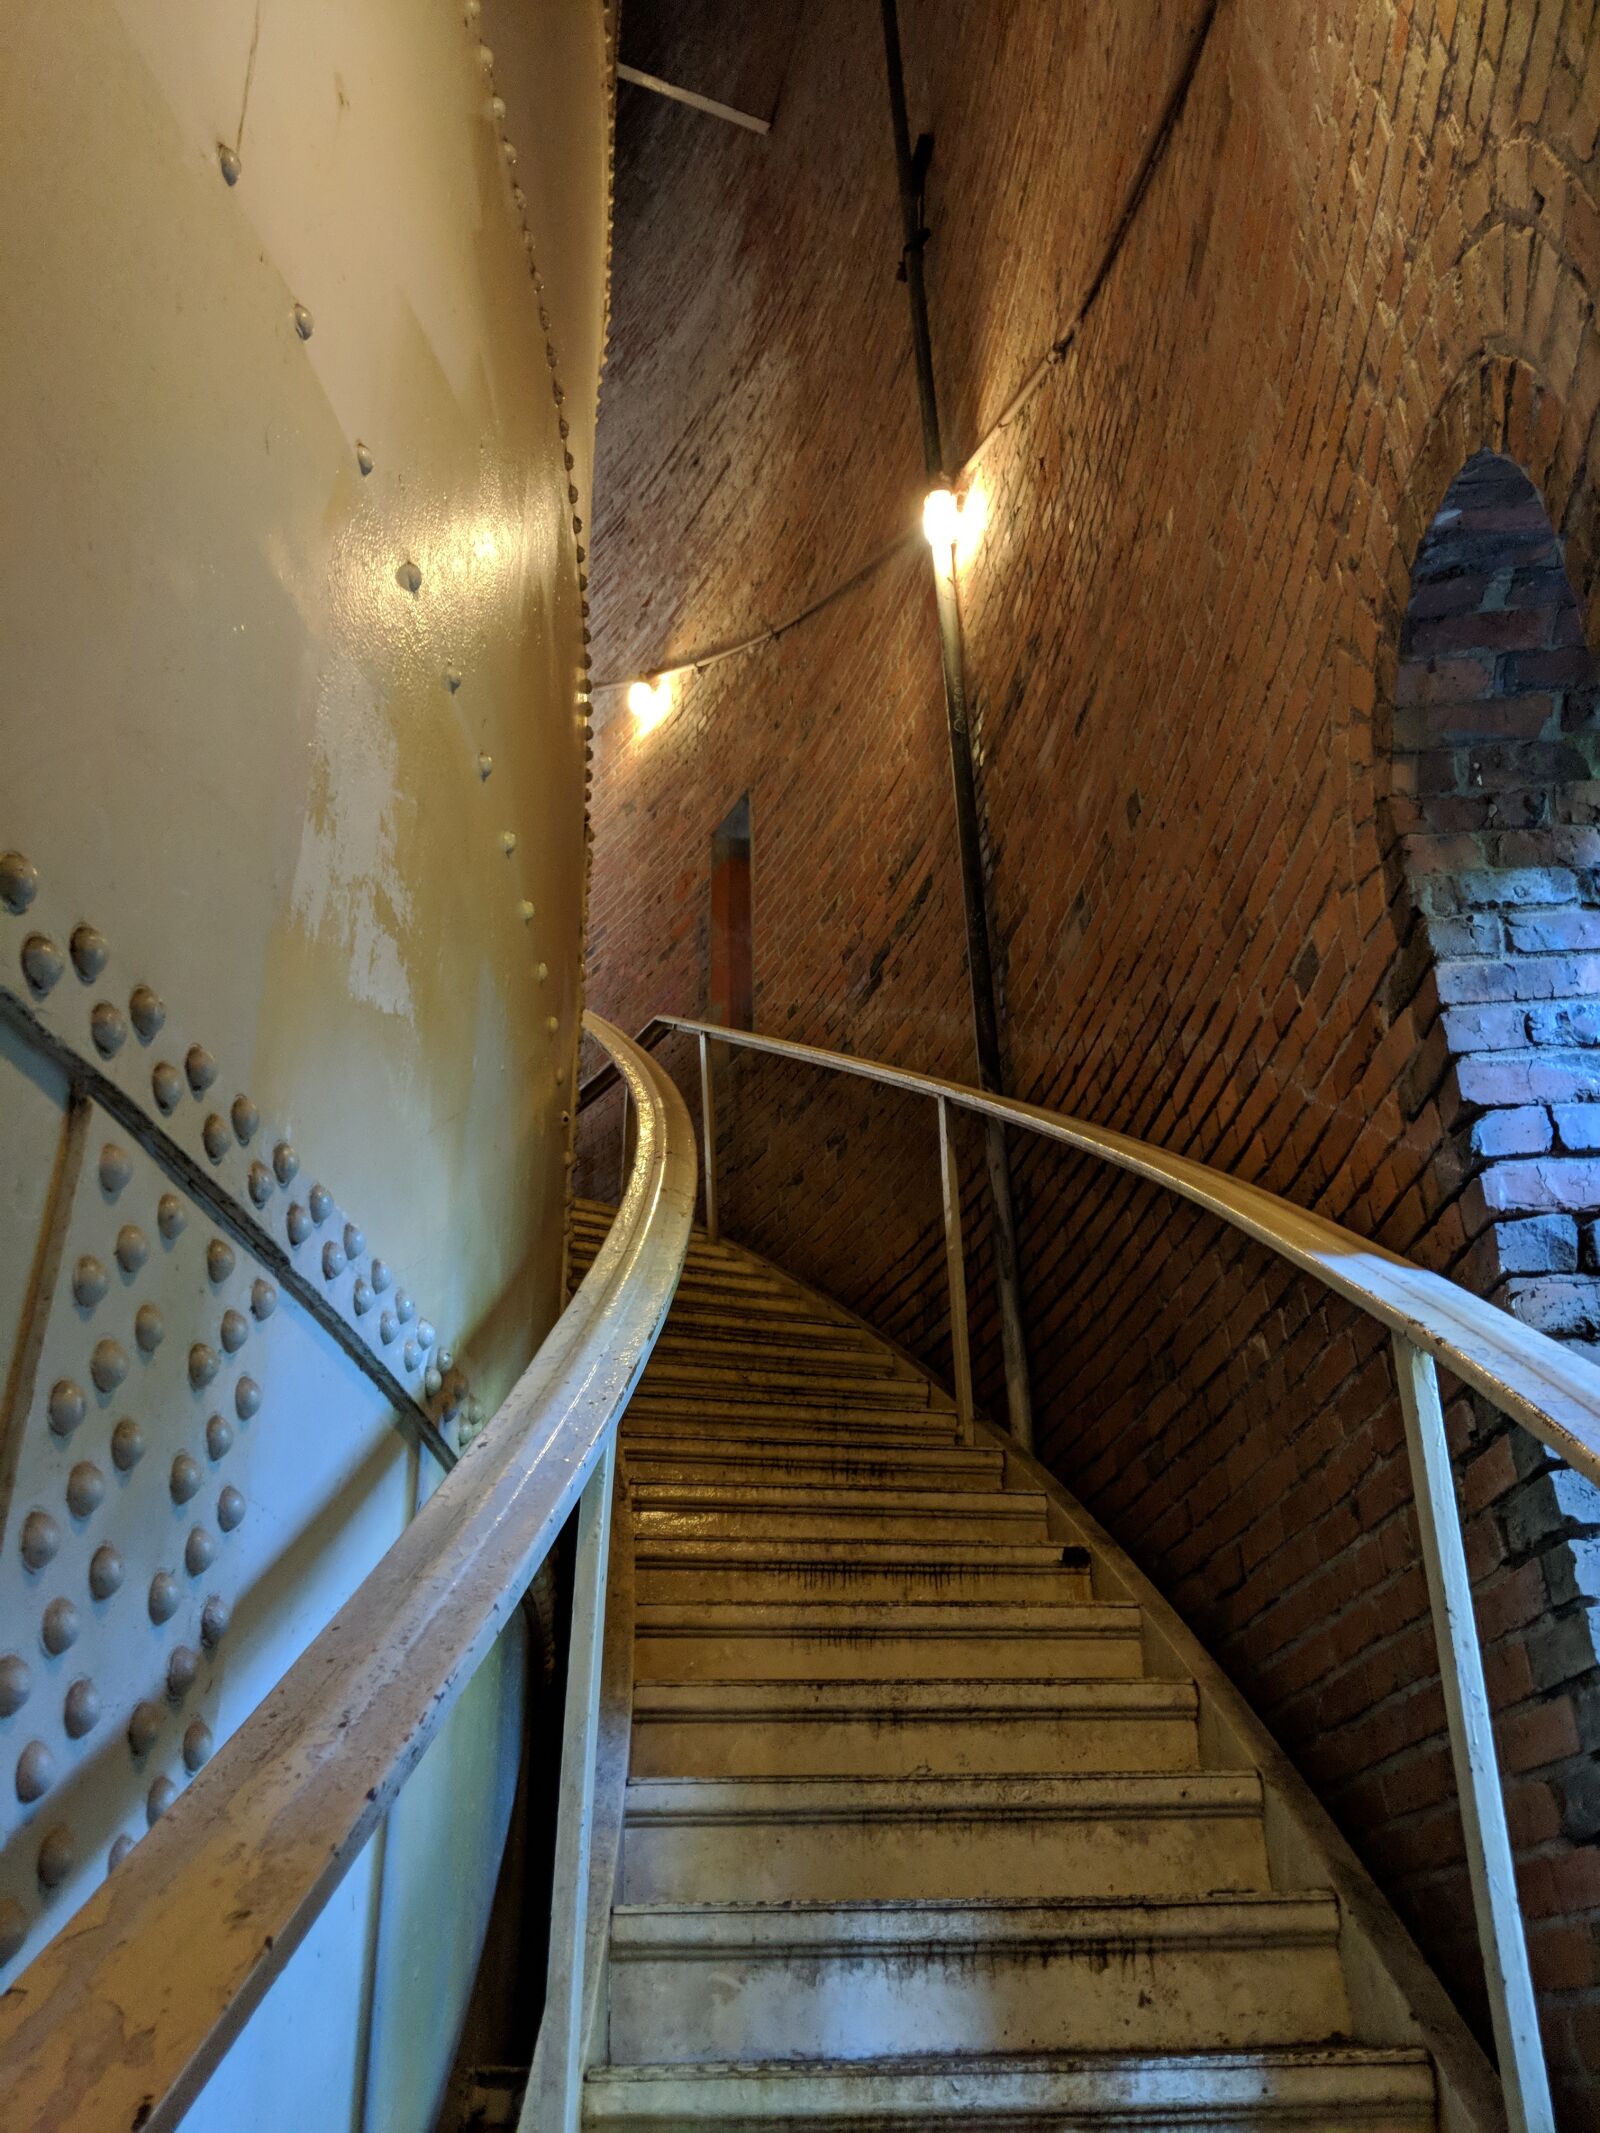 Google Pixel 2 sample photo. Stairs, stairway, up photography